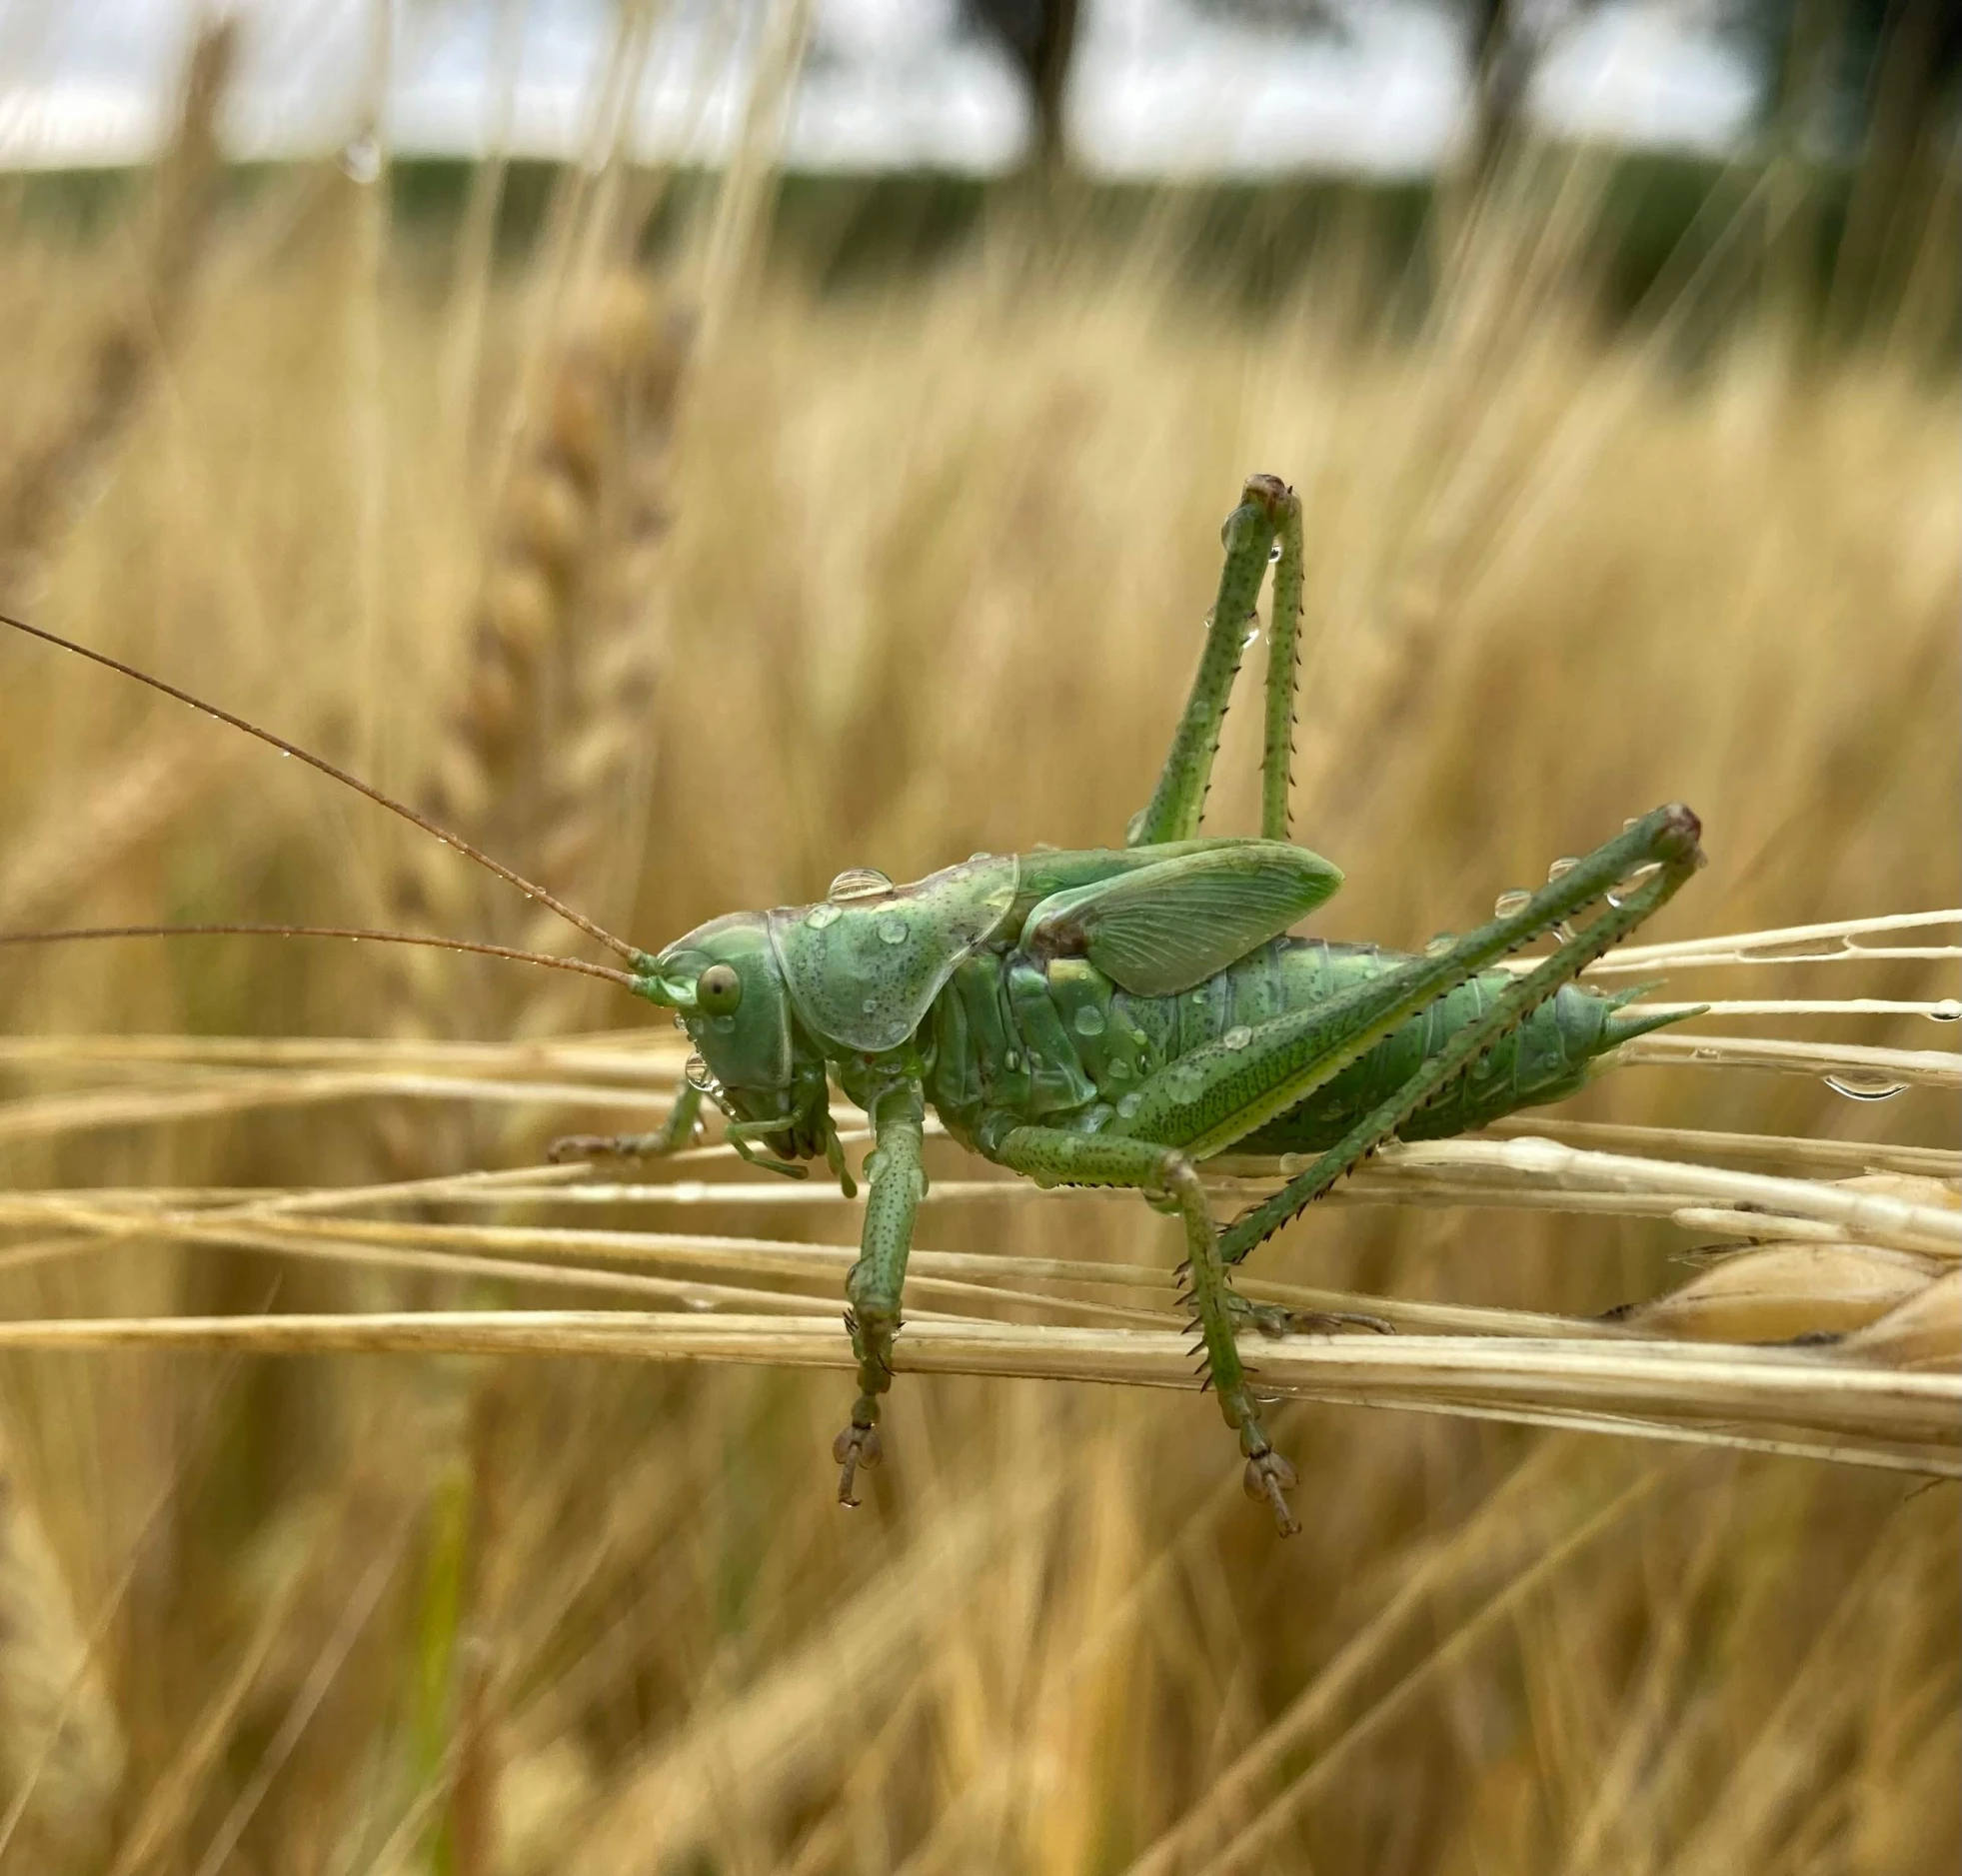 a large green insect standing in a wheat field